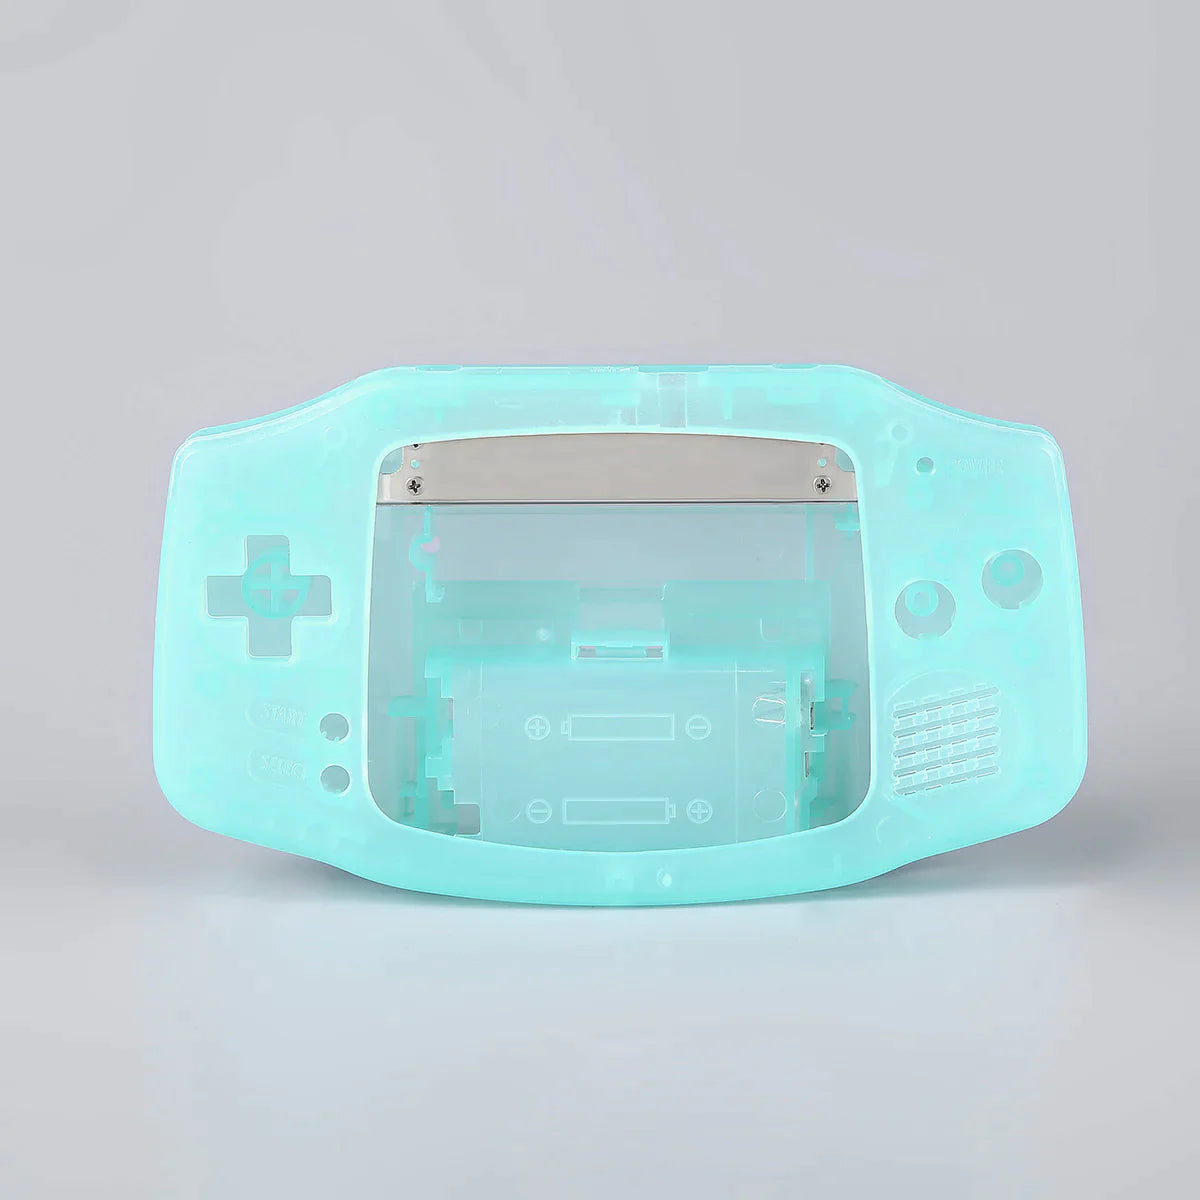 FunnyPlaying Game Boy Advance GBA Shells For Laminated IPS LCD